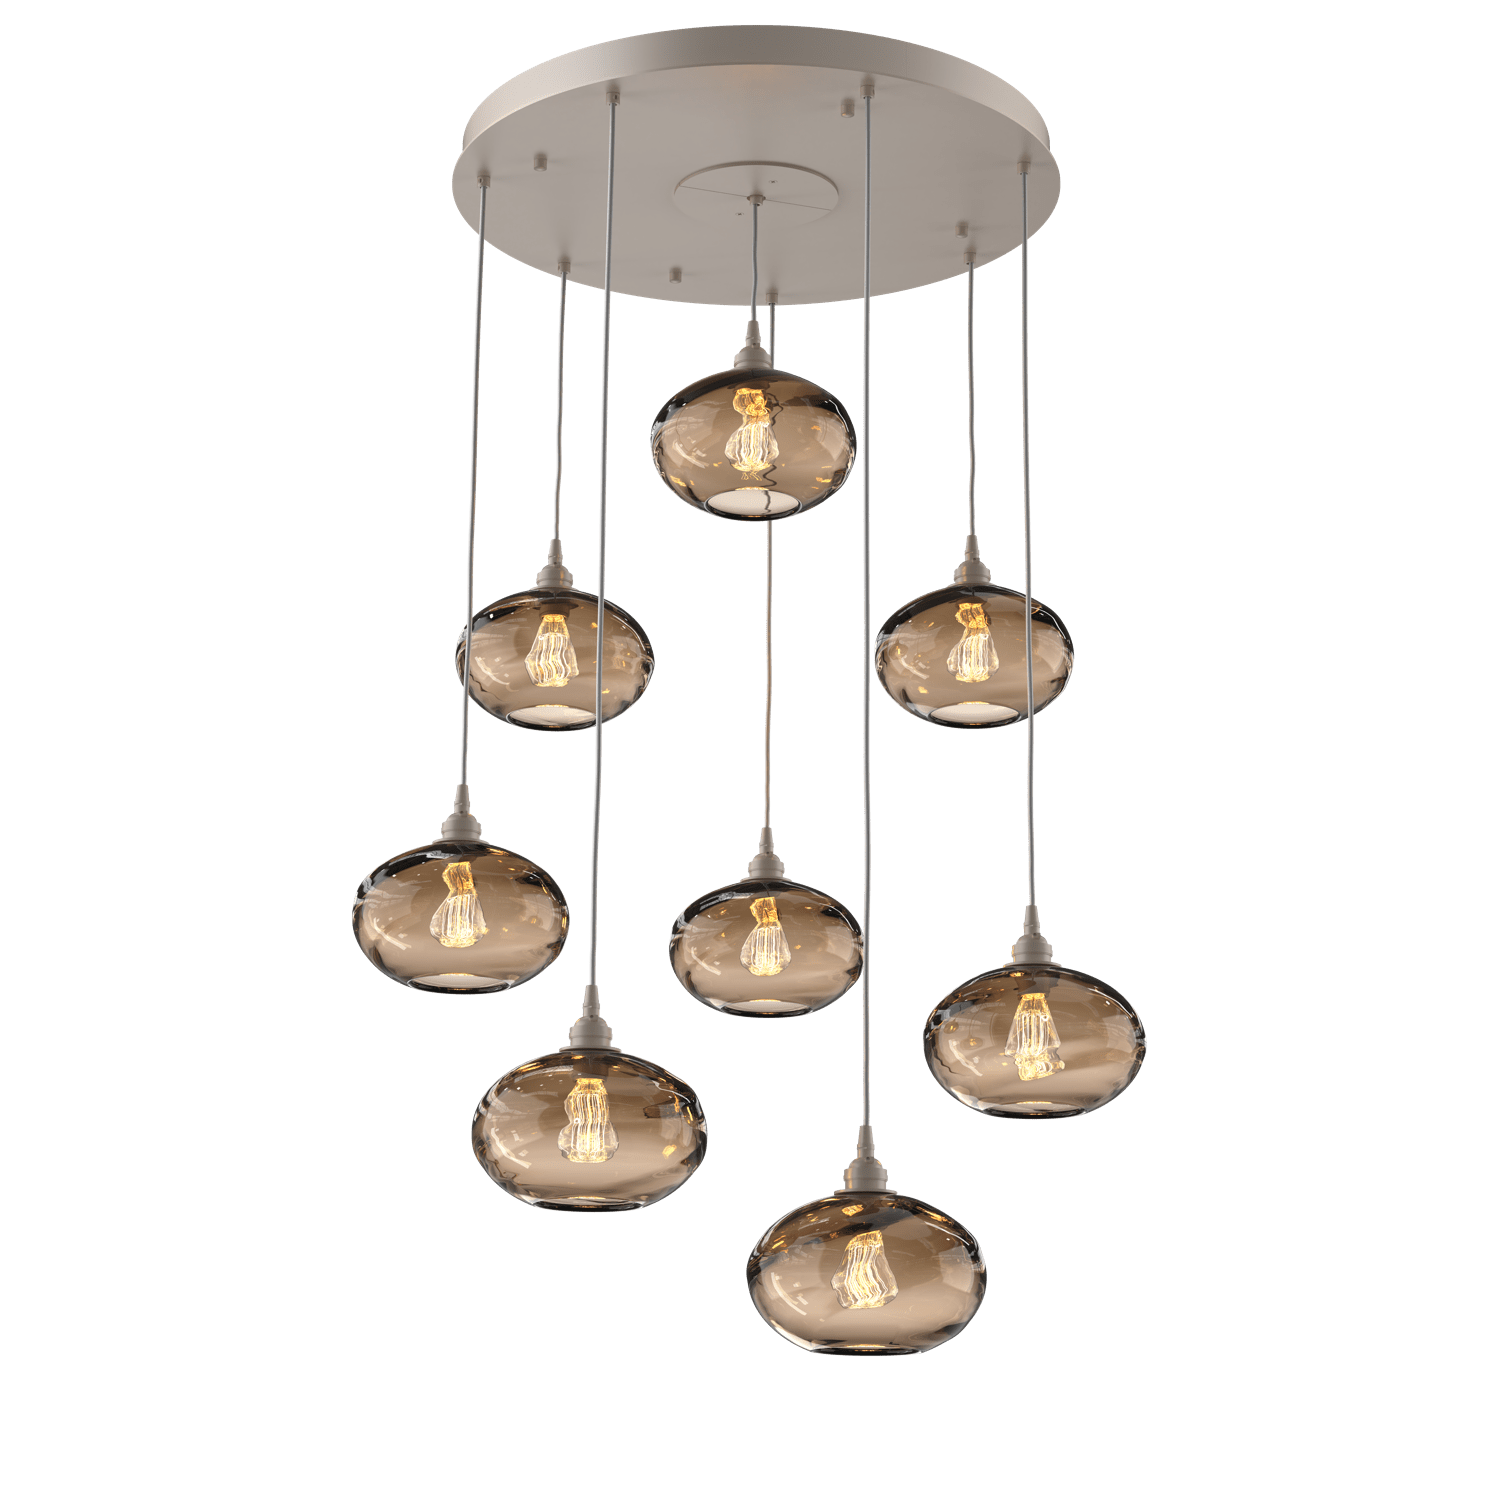 CHB0036-08-BS-OB-Hammerton-Studio-Optic-Blown-Glass-Coppa-8-light-round-pendant-chandelier-with-metallic-beige-silver-finish-and-optic-bronze-blown-glass-shades-and-incandescent-lamping